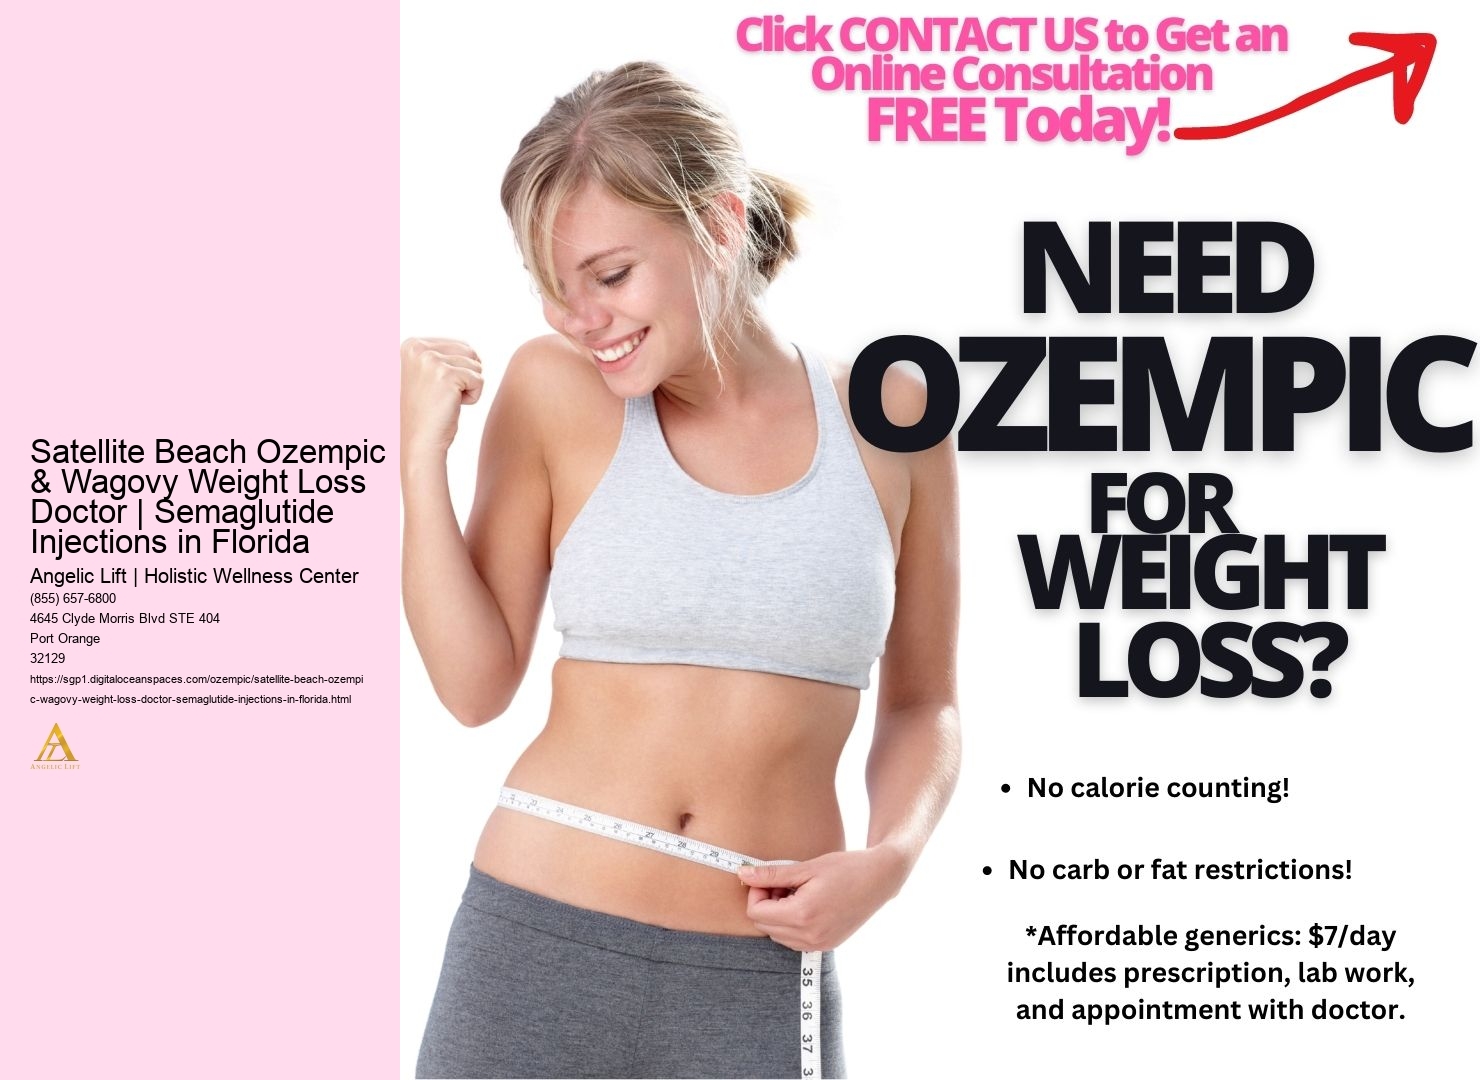 Satellite Beach Ozempic & Wagovy Weight Loss Doctor | Semaglutide Injections in Florida